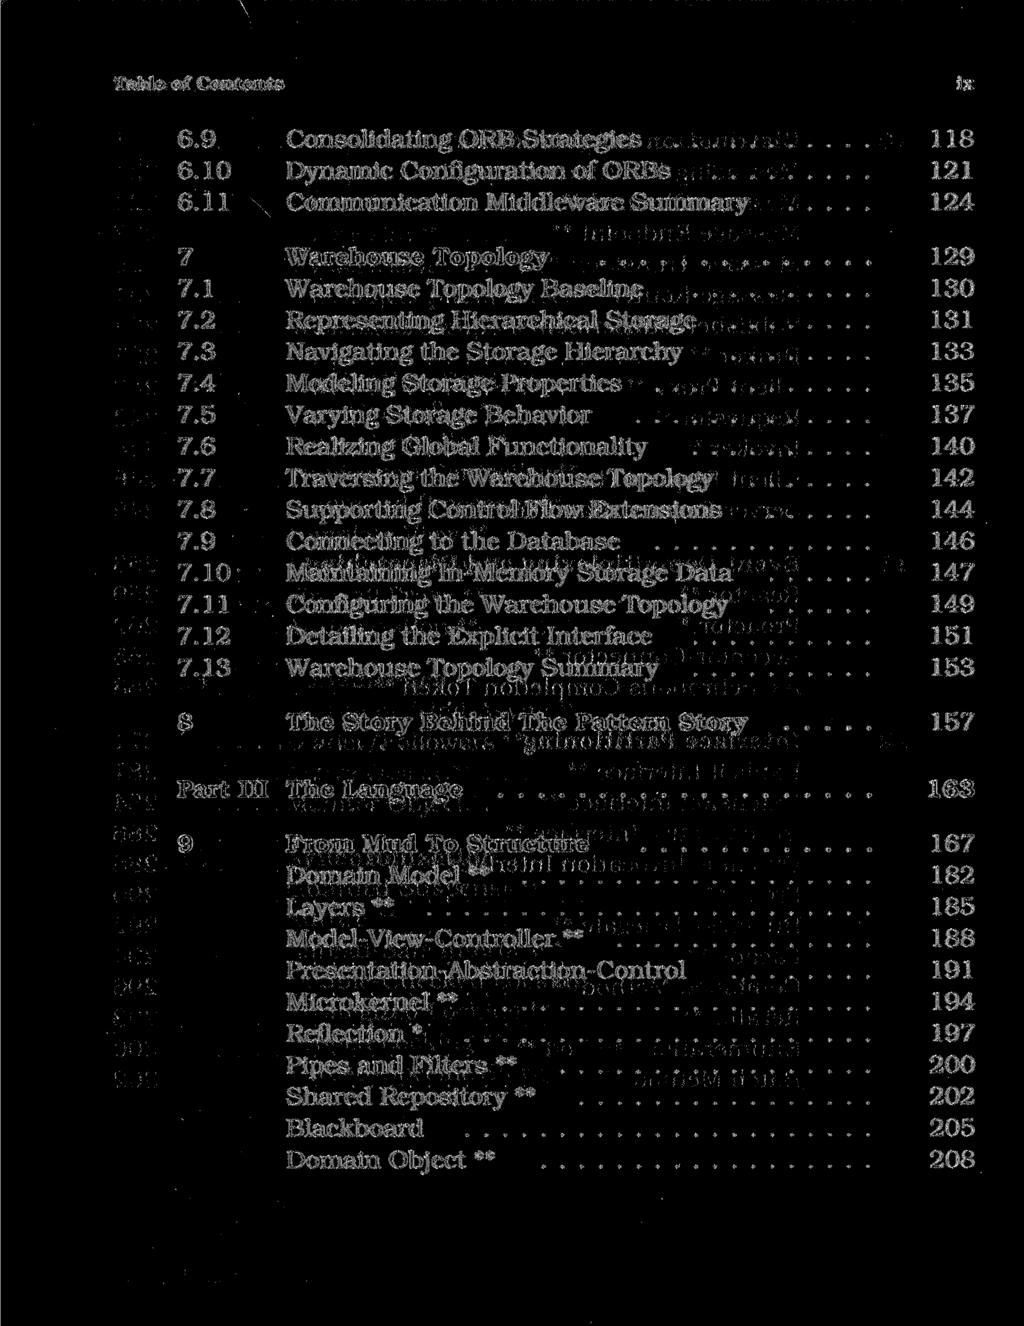 Table of Contents ix 6.9 Consolidating ORB Strategies 118 6.10 Dynamic Configuration of ORBs 121 6.11 Communication Middleware Summary 124 7 Warehouse Topology 129 7.